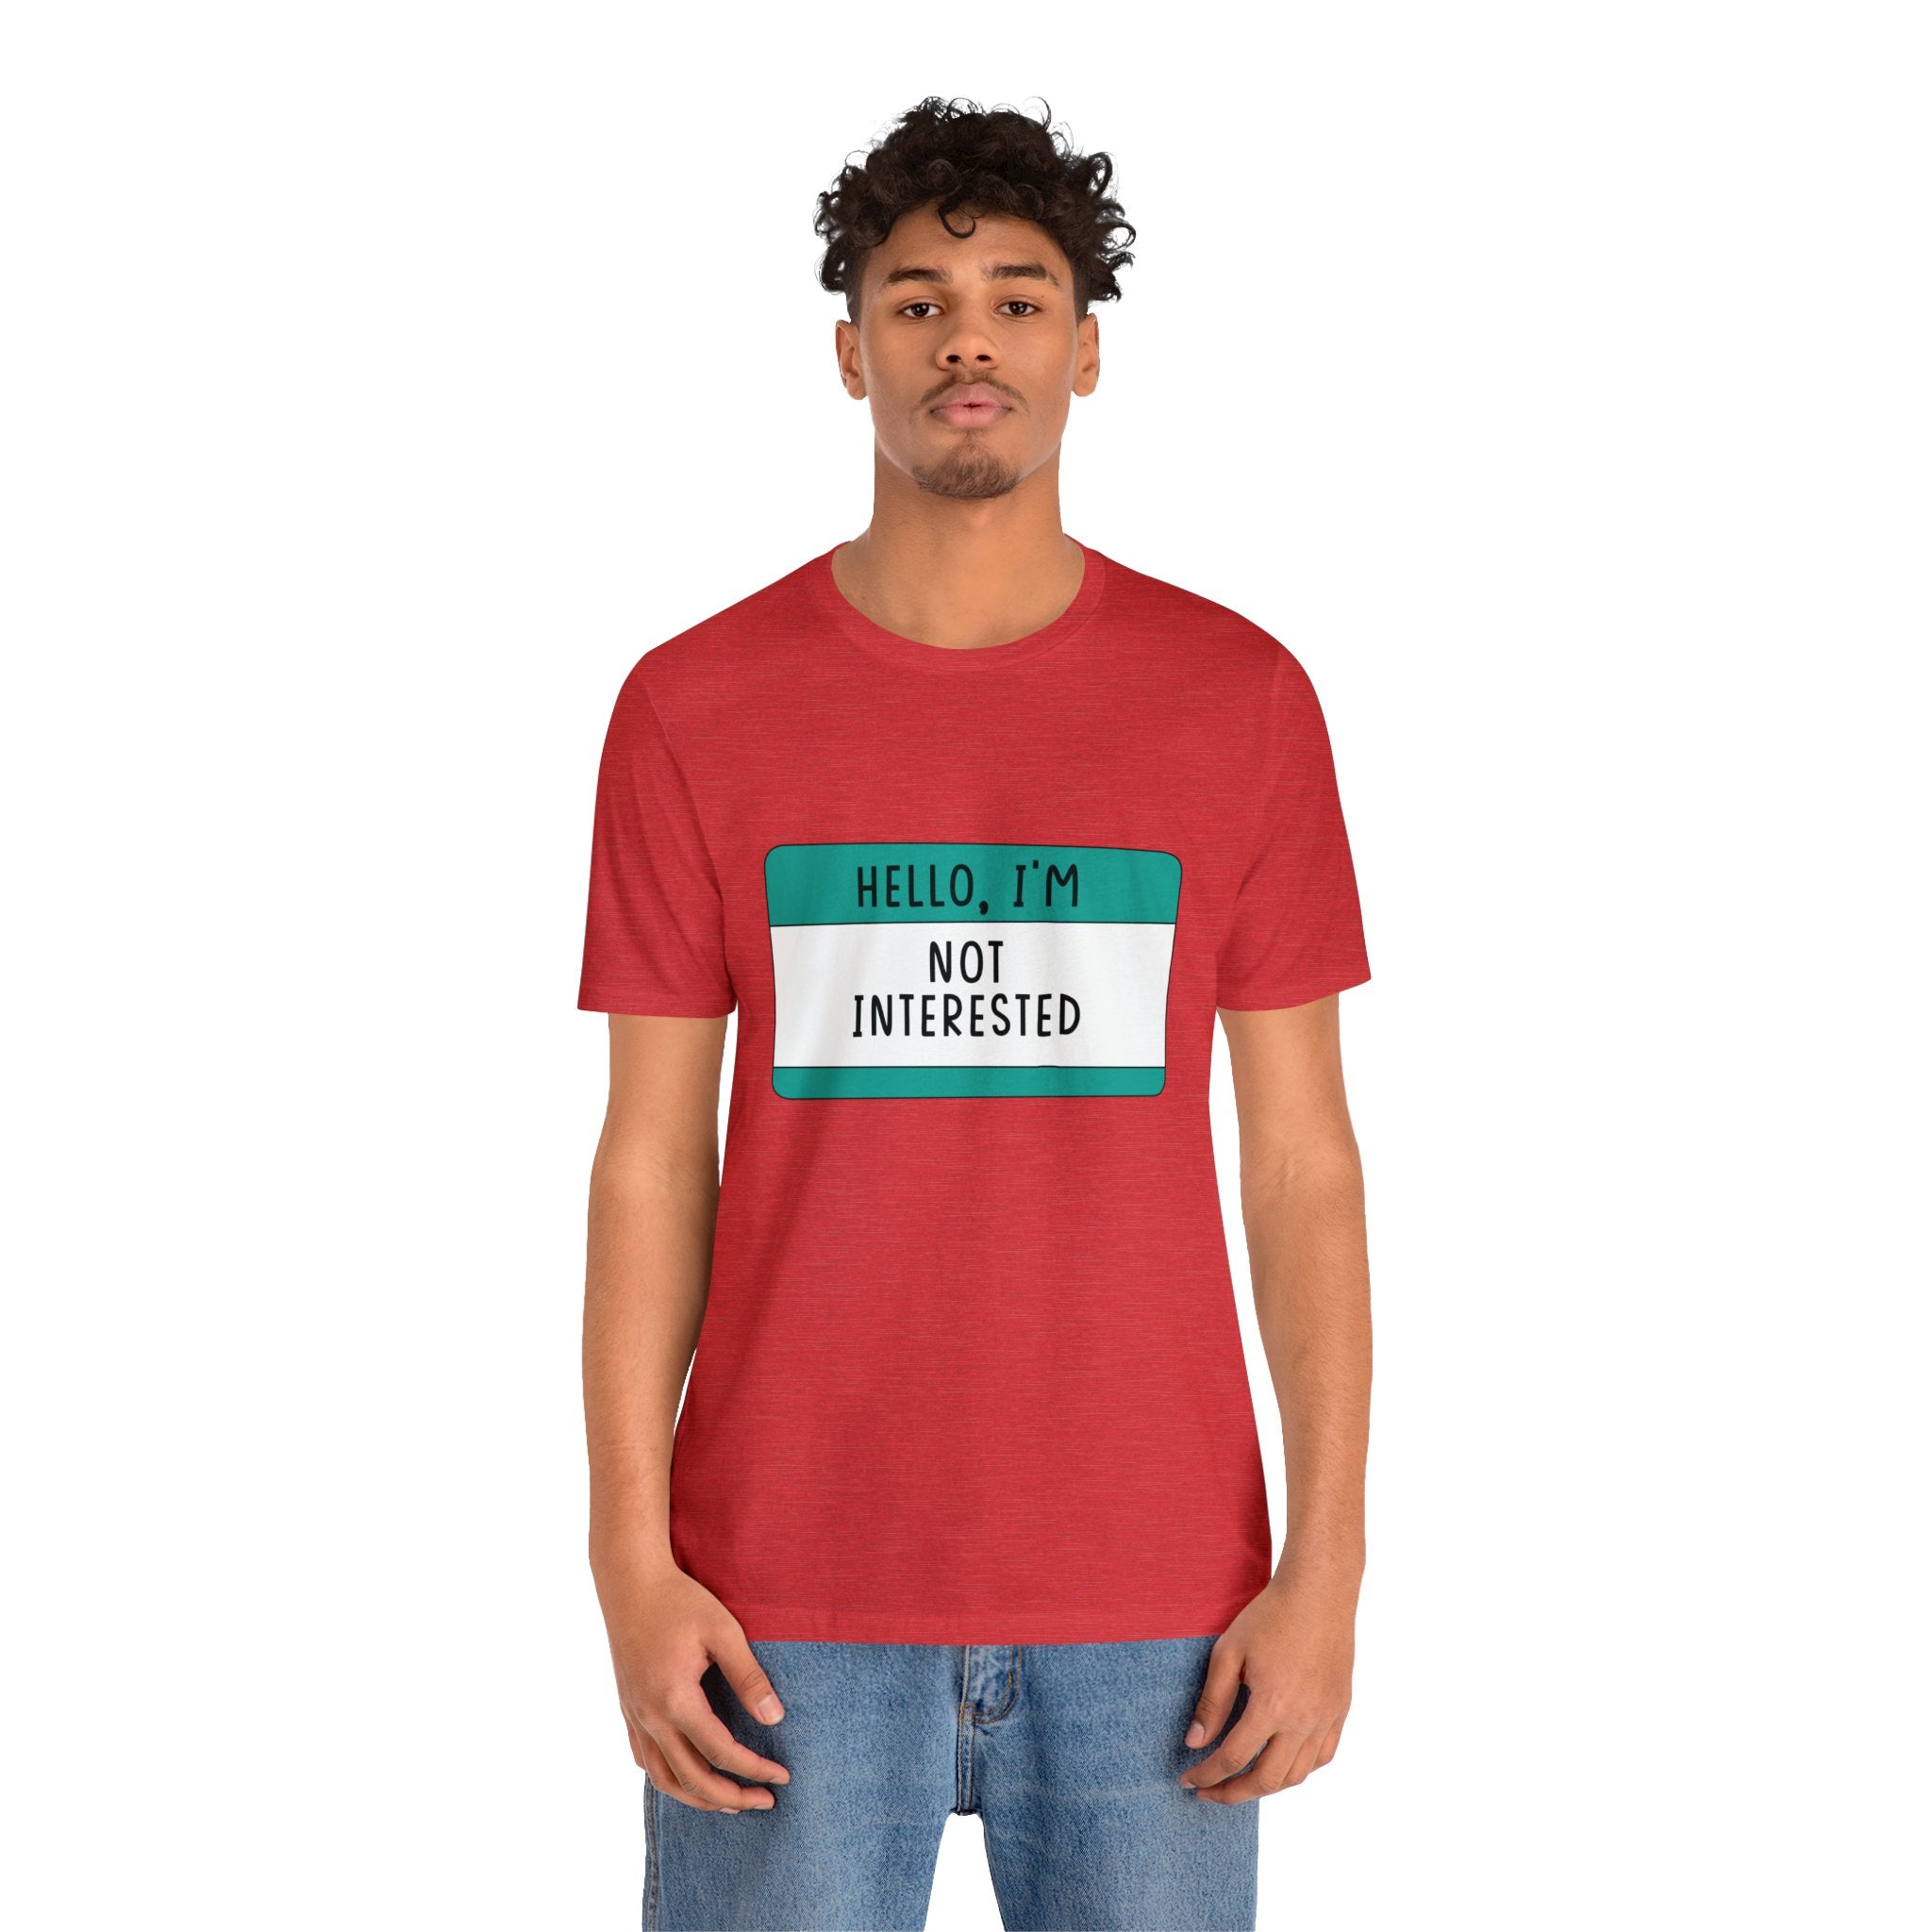 A man in a red tee-shirt that says "Hello, I'm Not Interested" builds character.